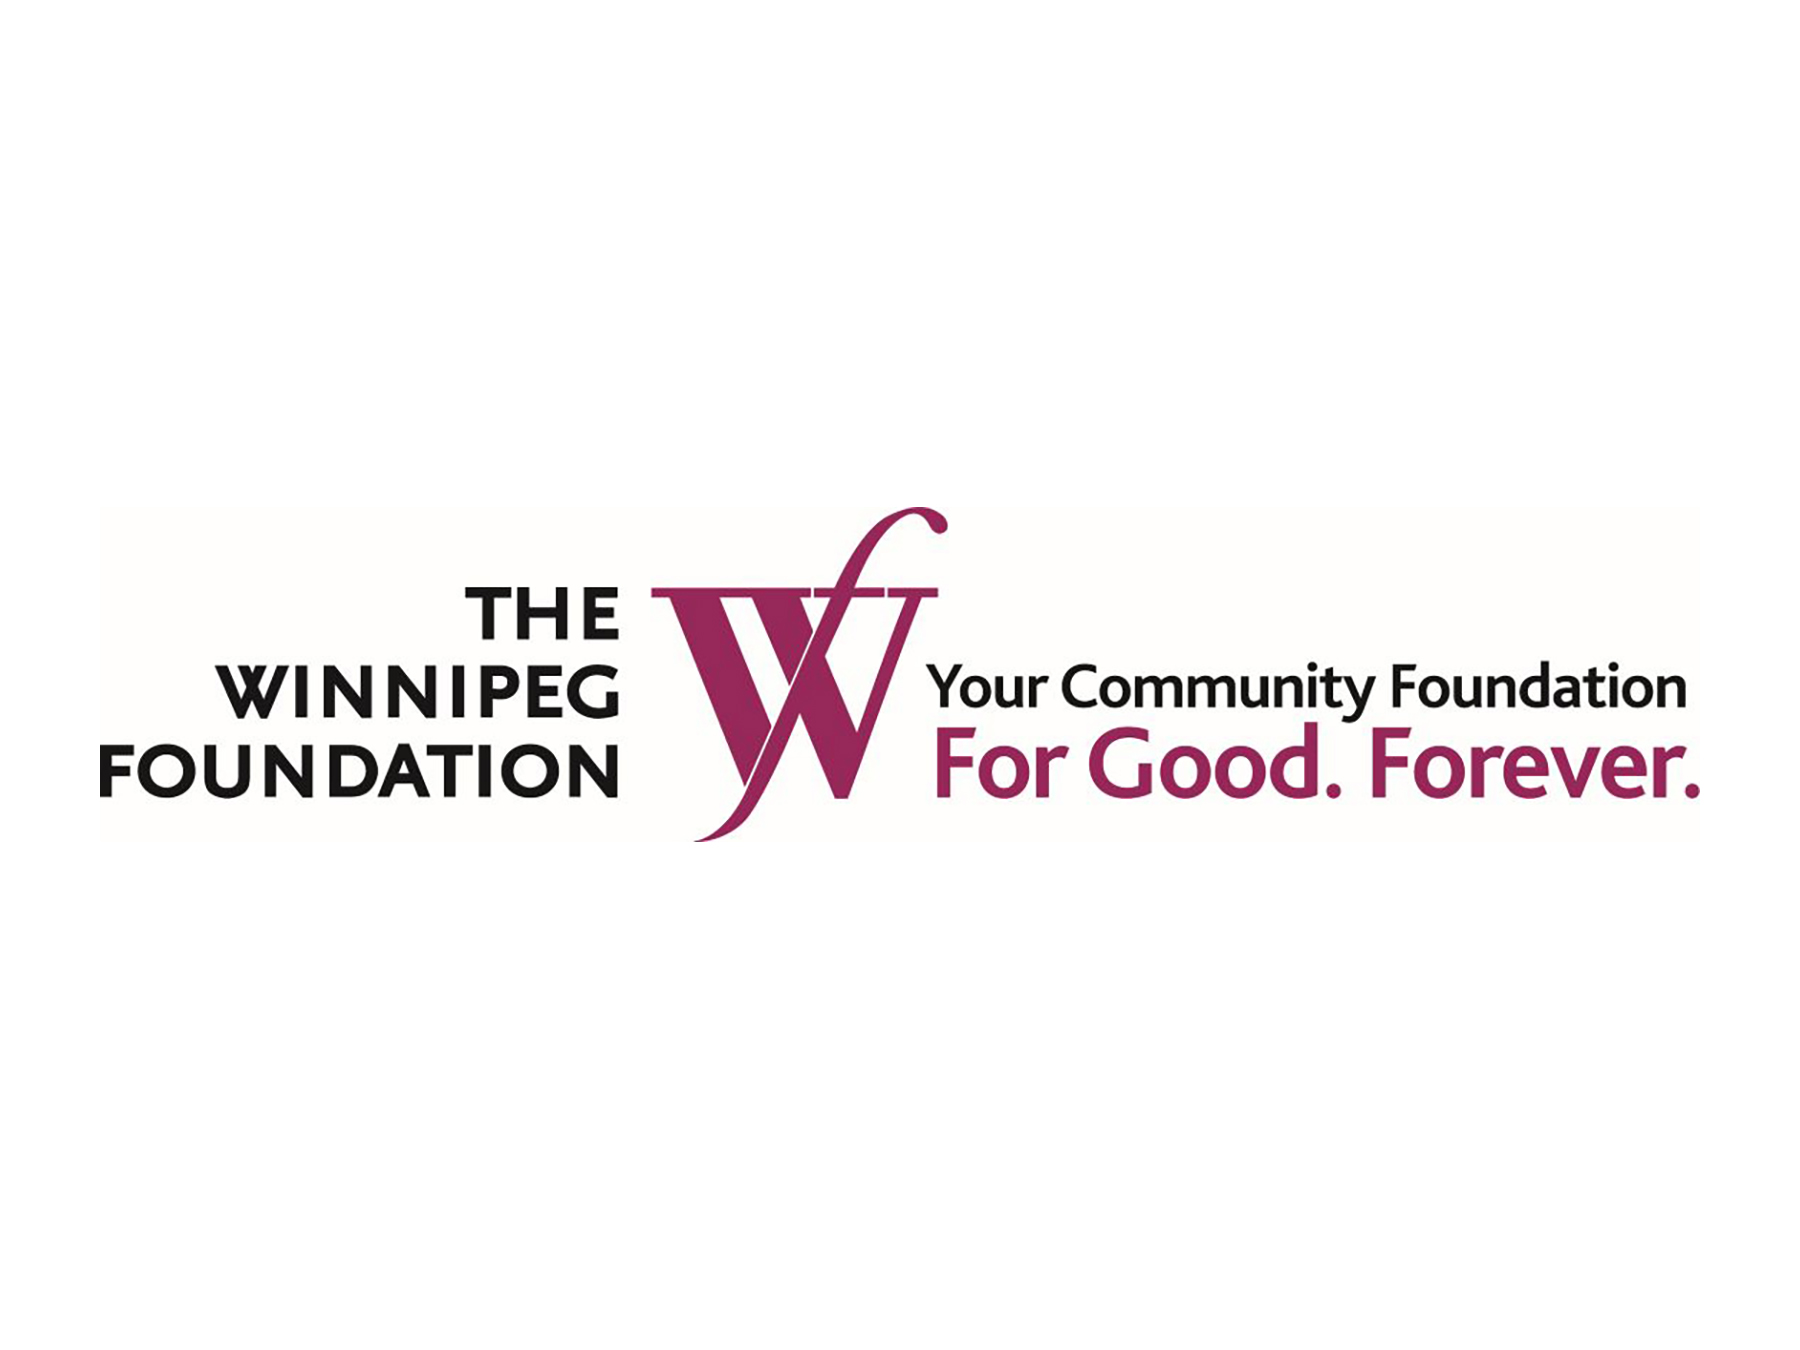 The Winnipeg Foundation - Your Community Foundation. For good. Forever.